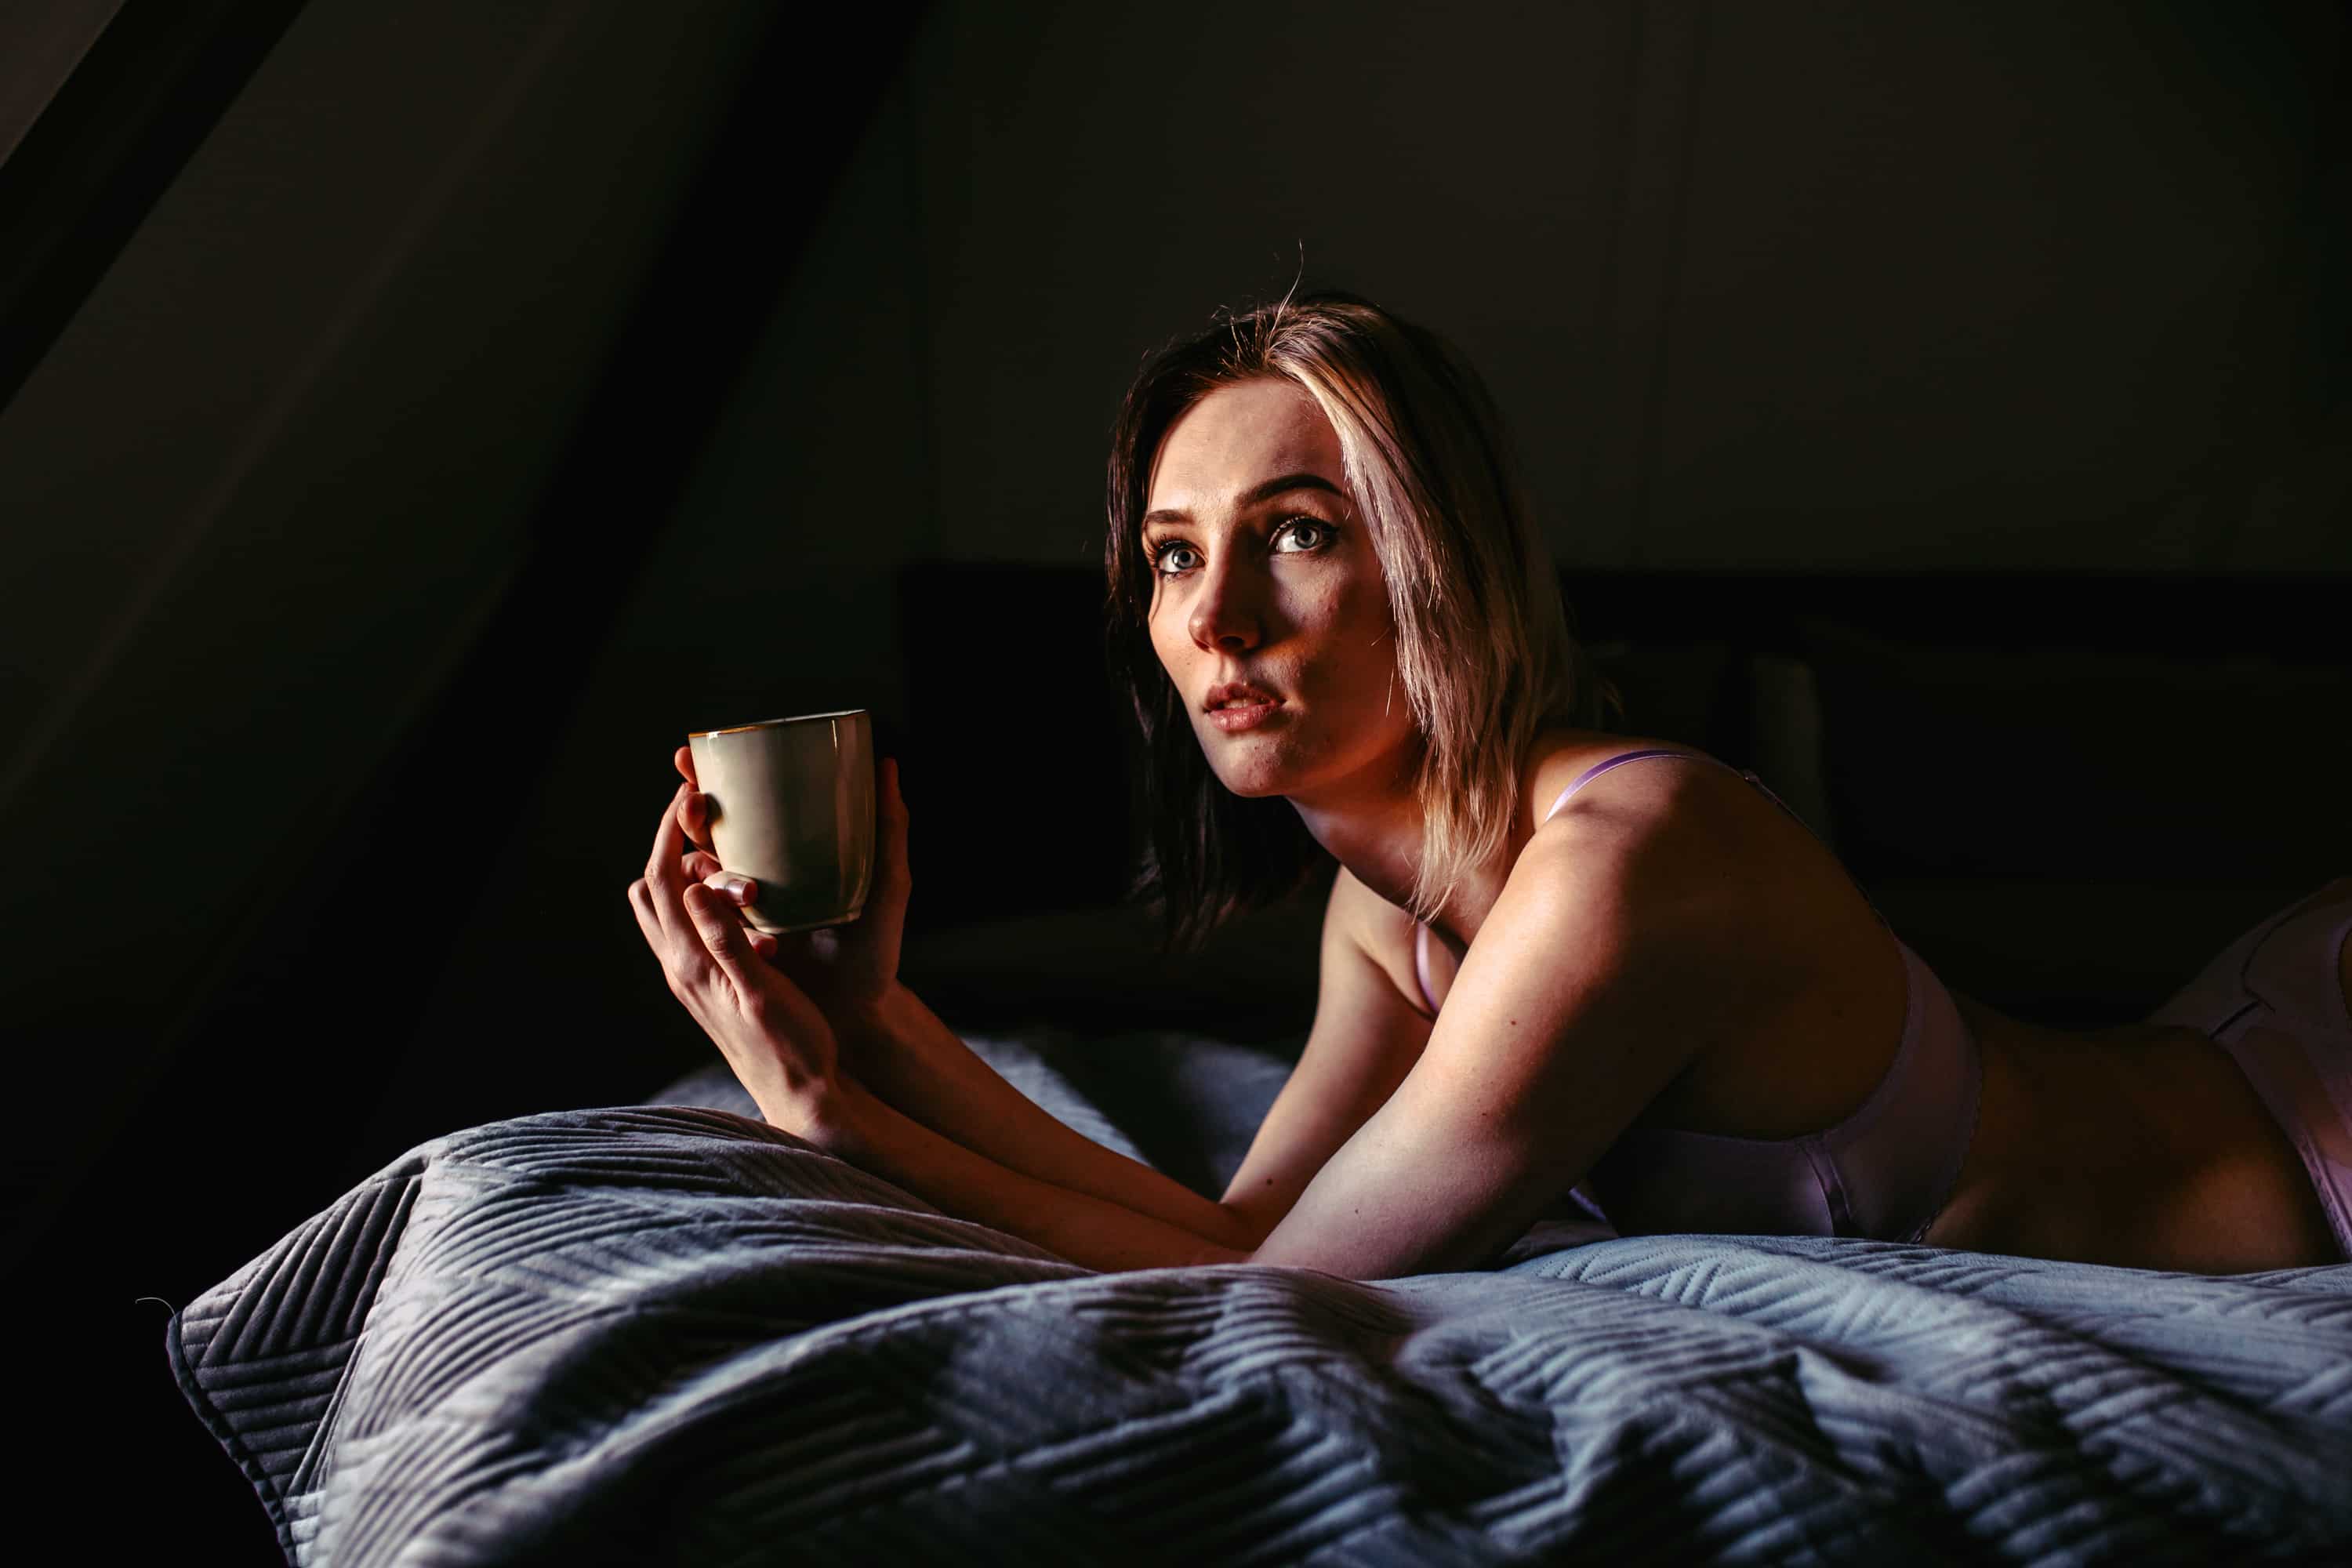 A boudoir shoot of a woman in Westland, as she relaxes on her bed and gently rocks a cup of coffee.